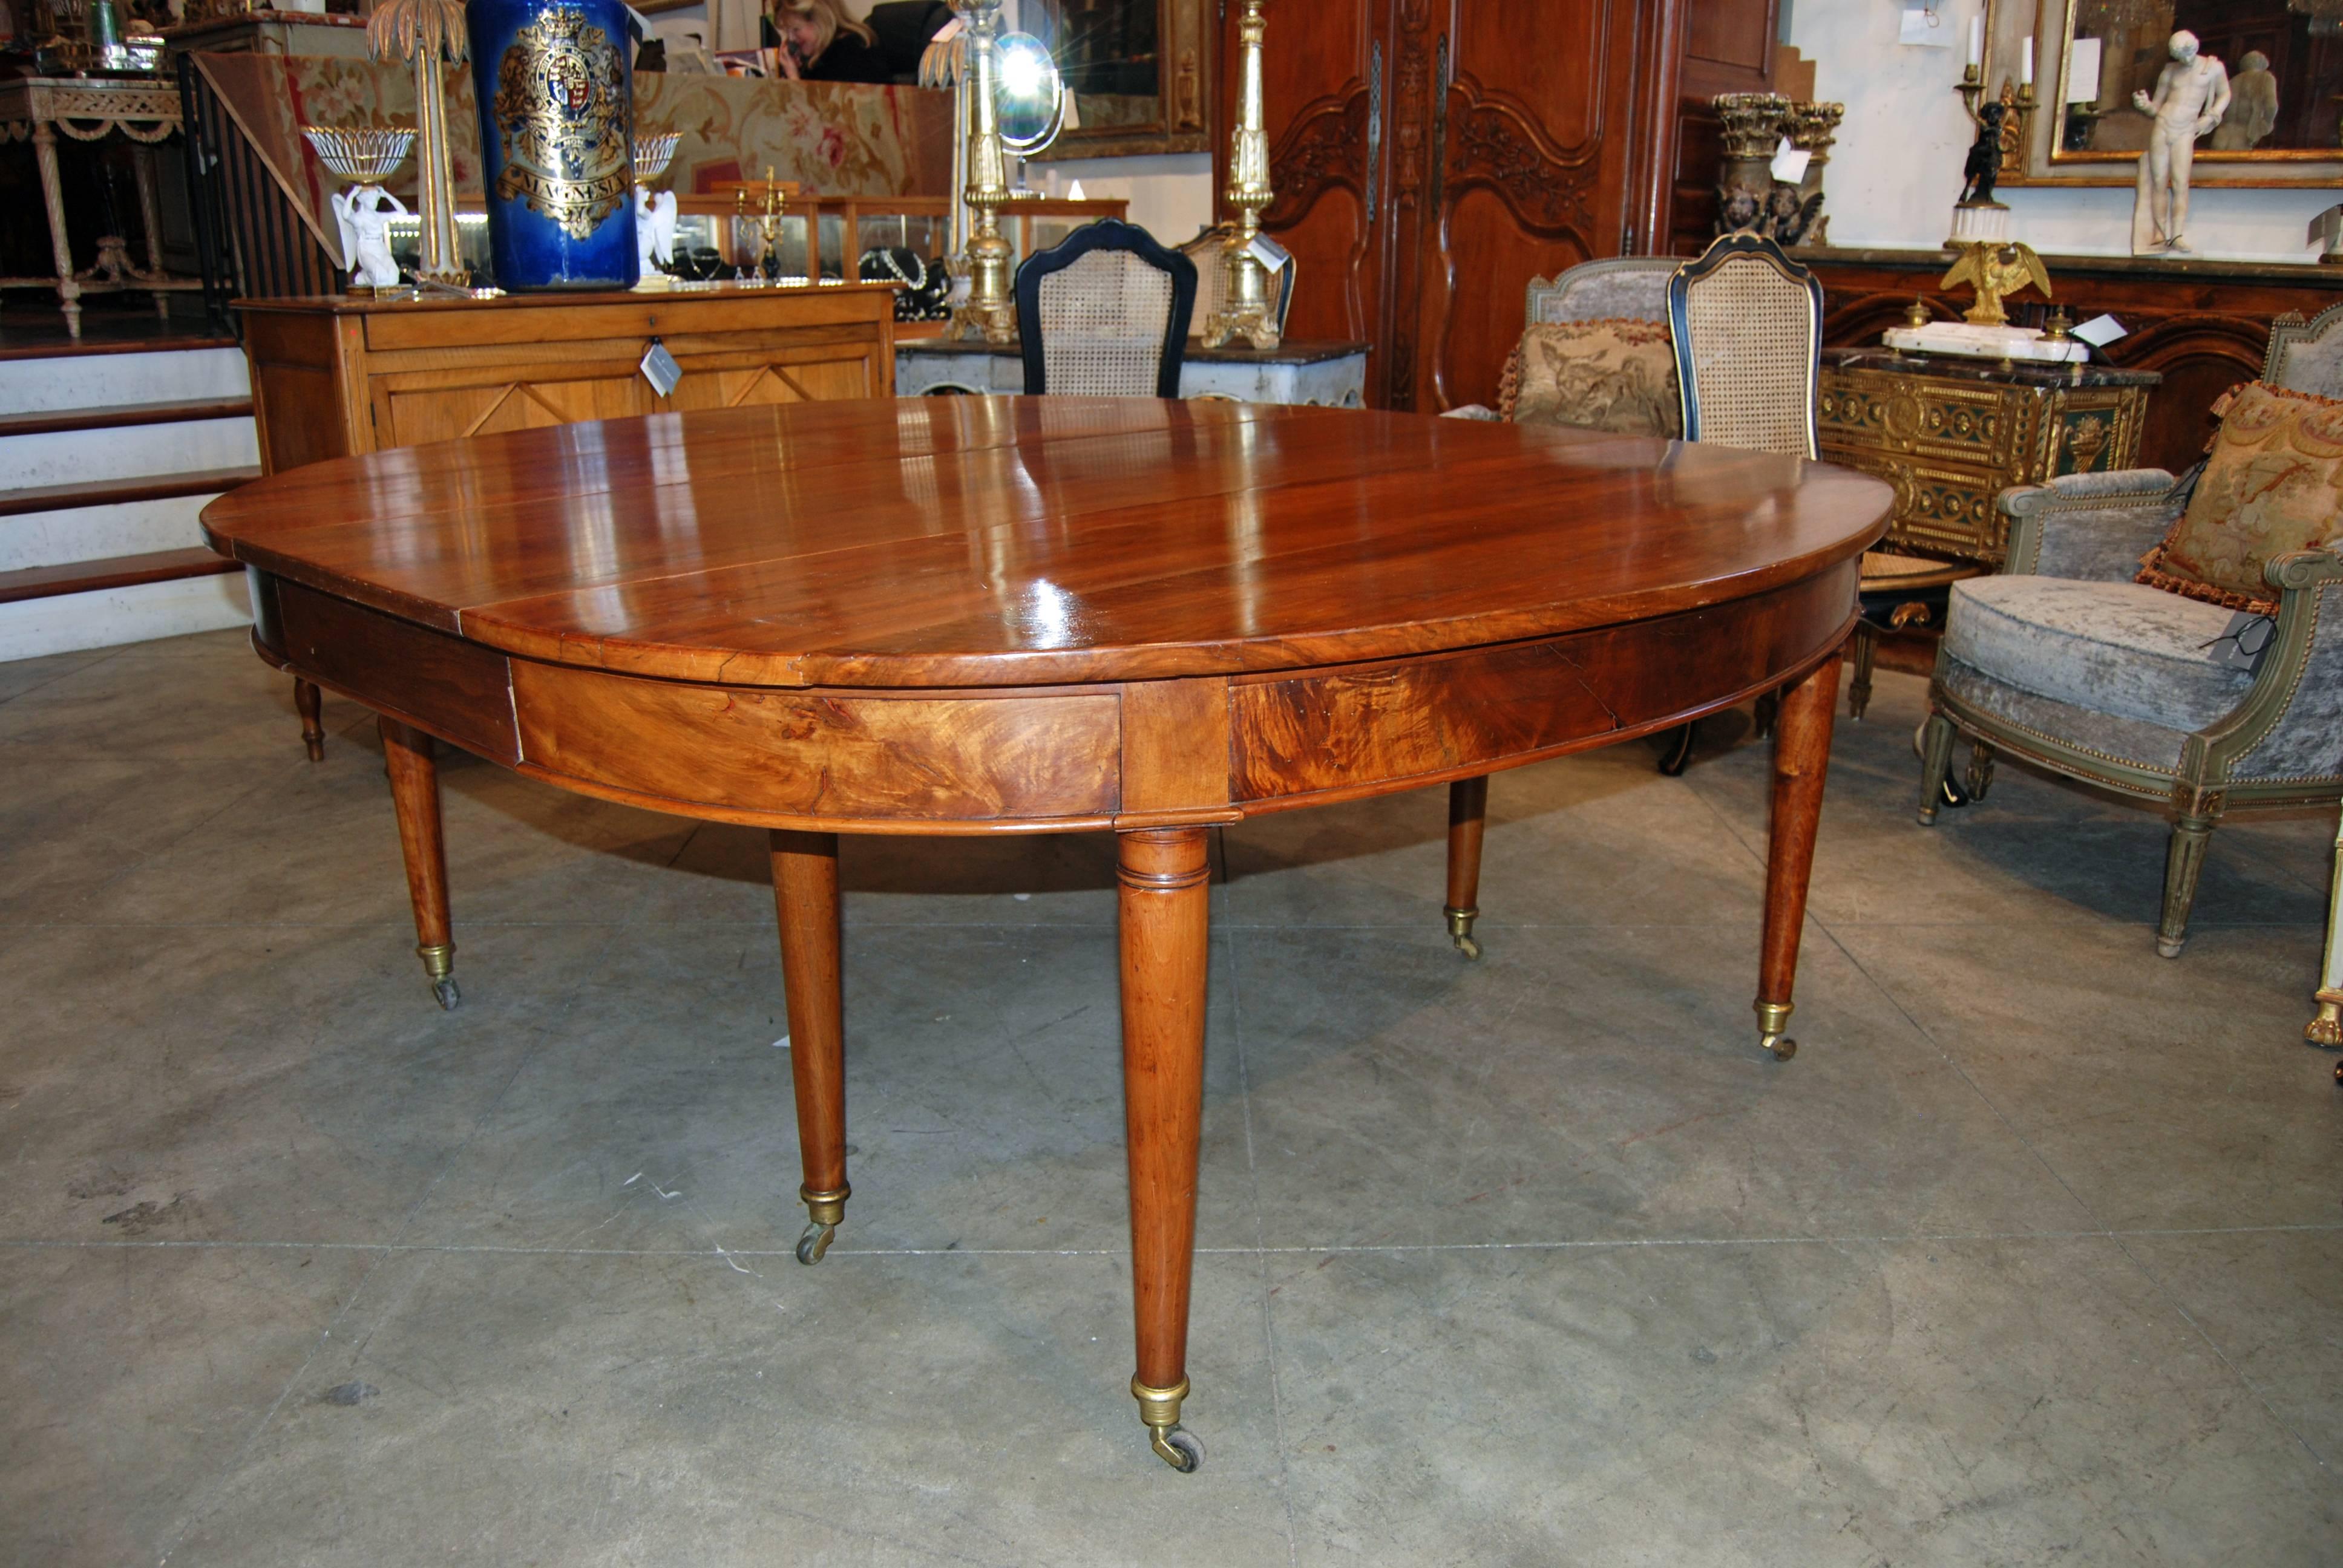 Exceptional Directoire walnut extension table.
Six leaves. 19.25 